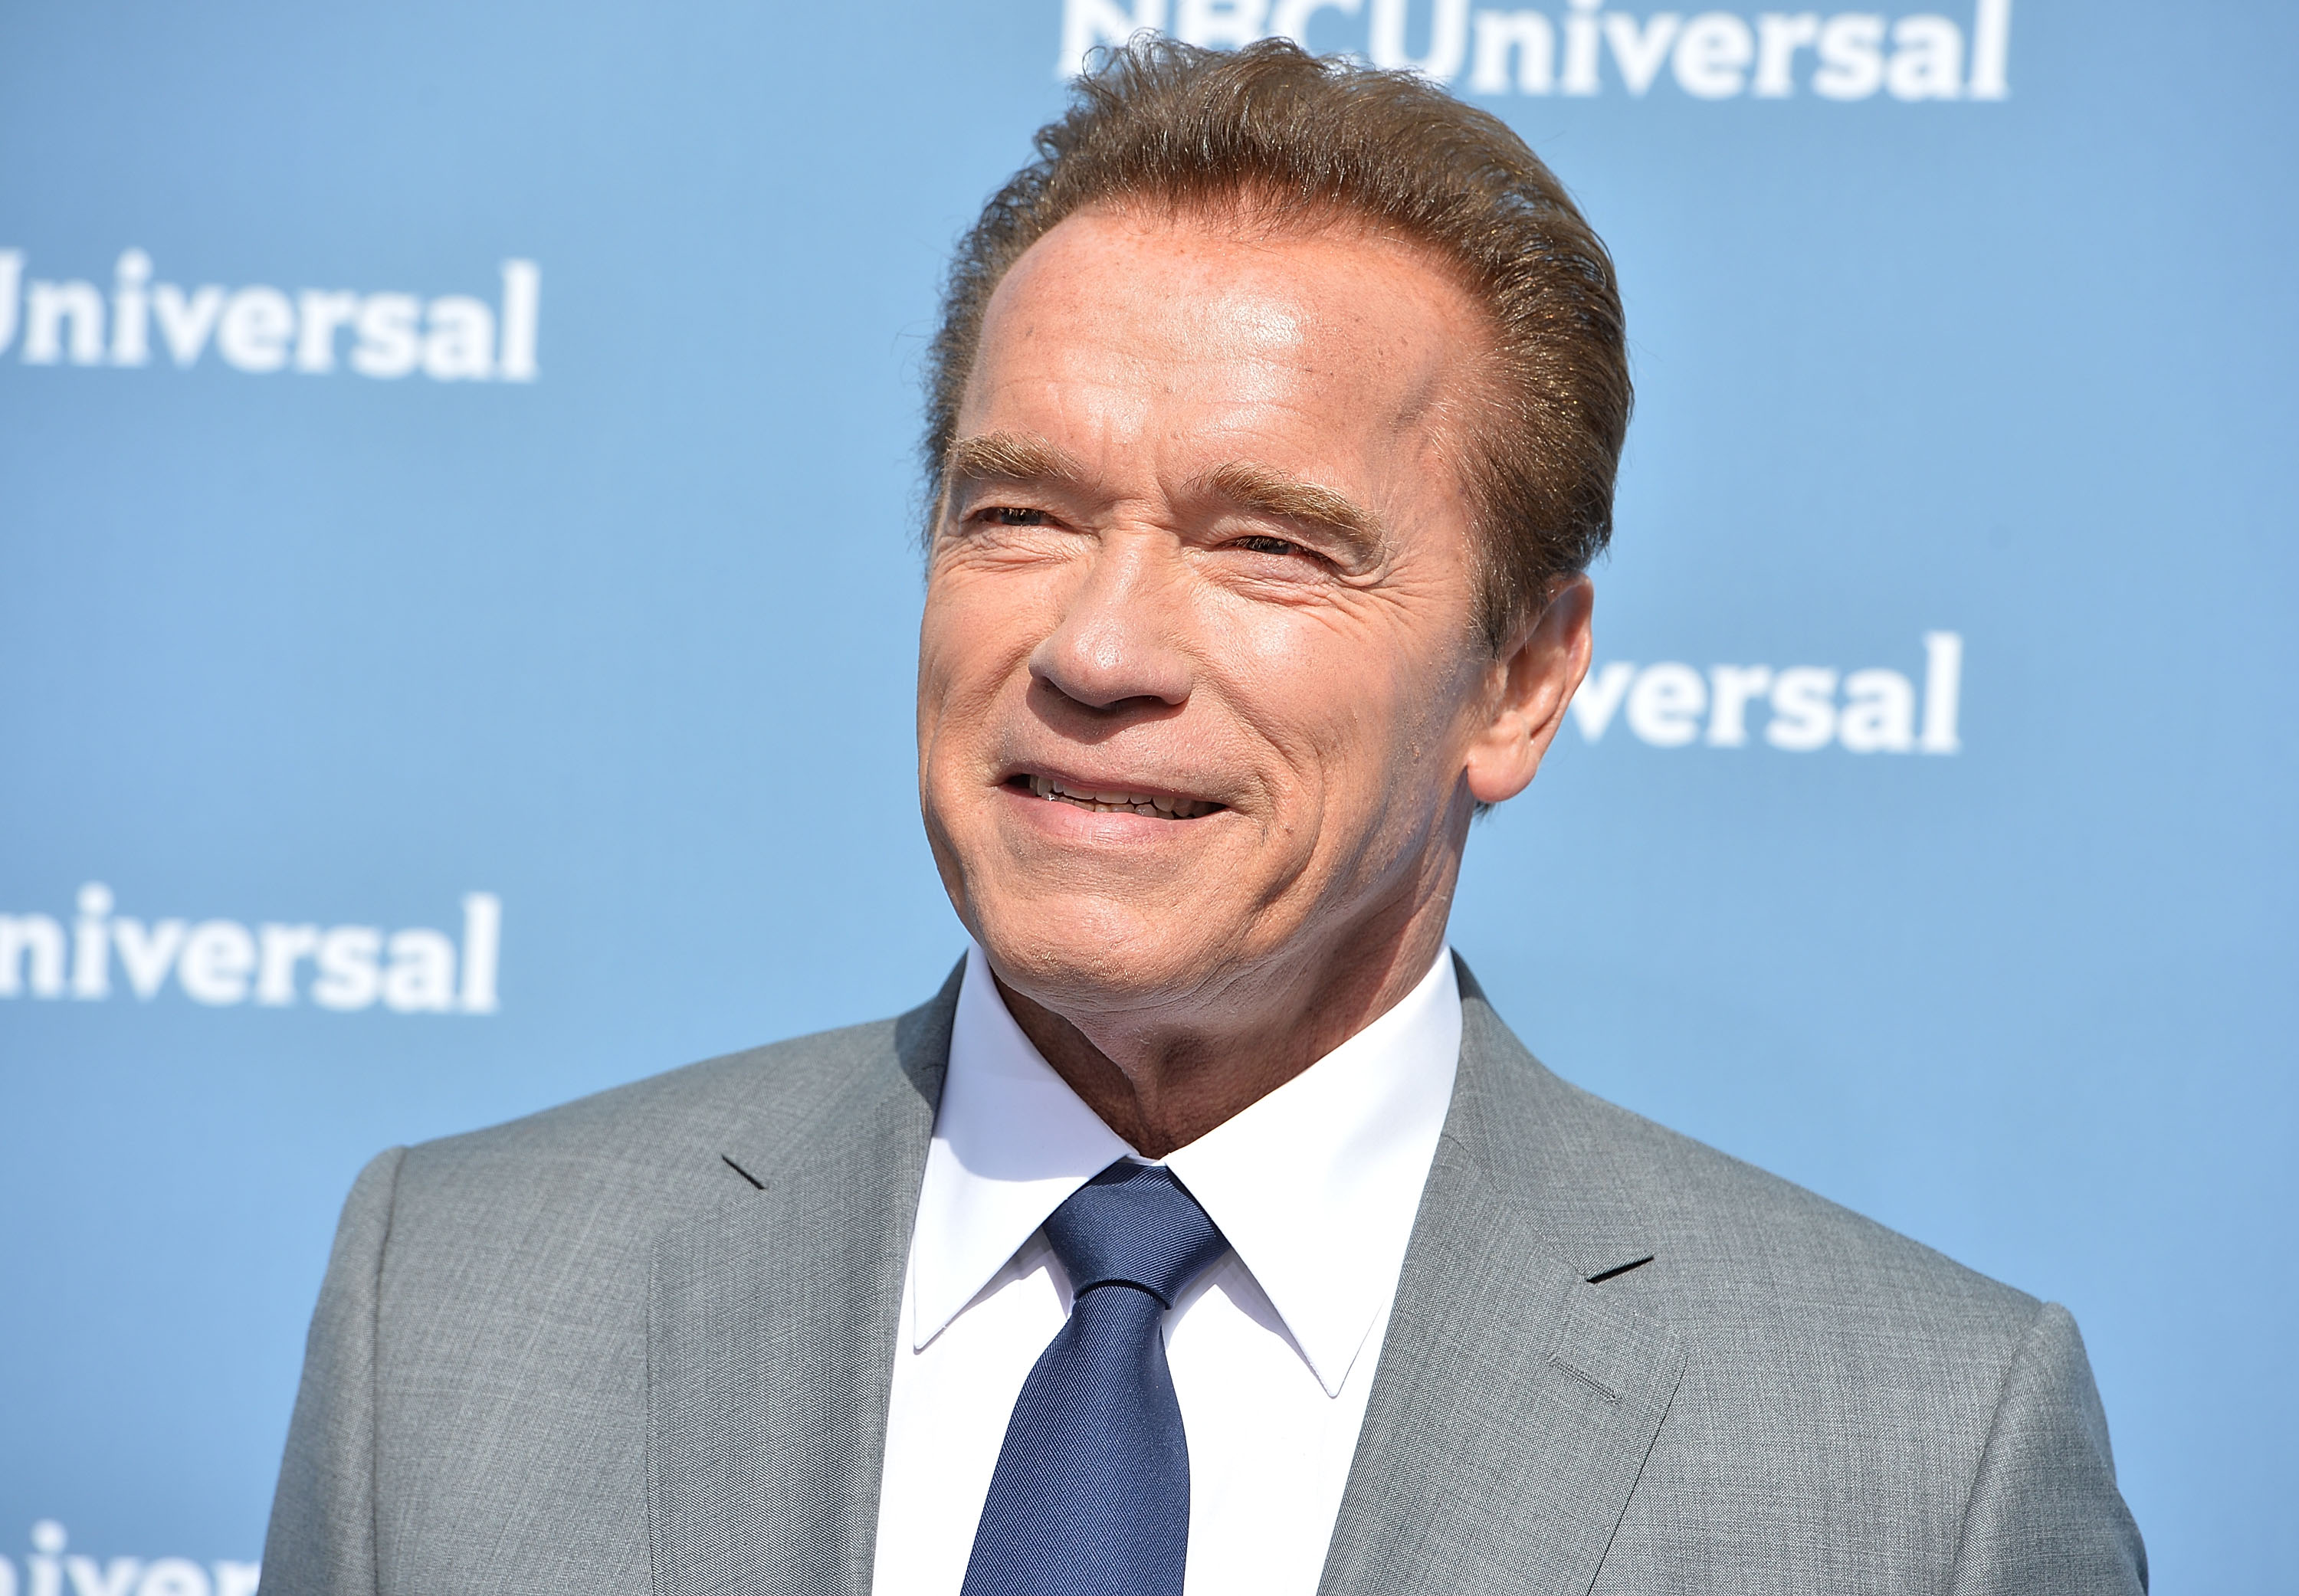 Arnold Schwarzenegger attends the NBCUniversal 2016 Upfront Presentation on May 16, 2016 in New York, New York. (Slaven Vlasic&mdash;Getty Images)